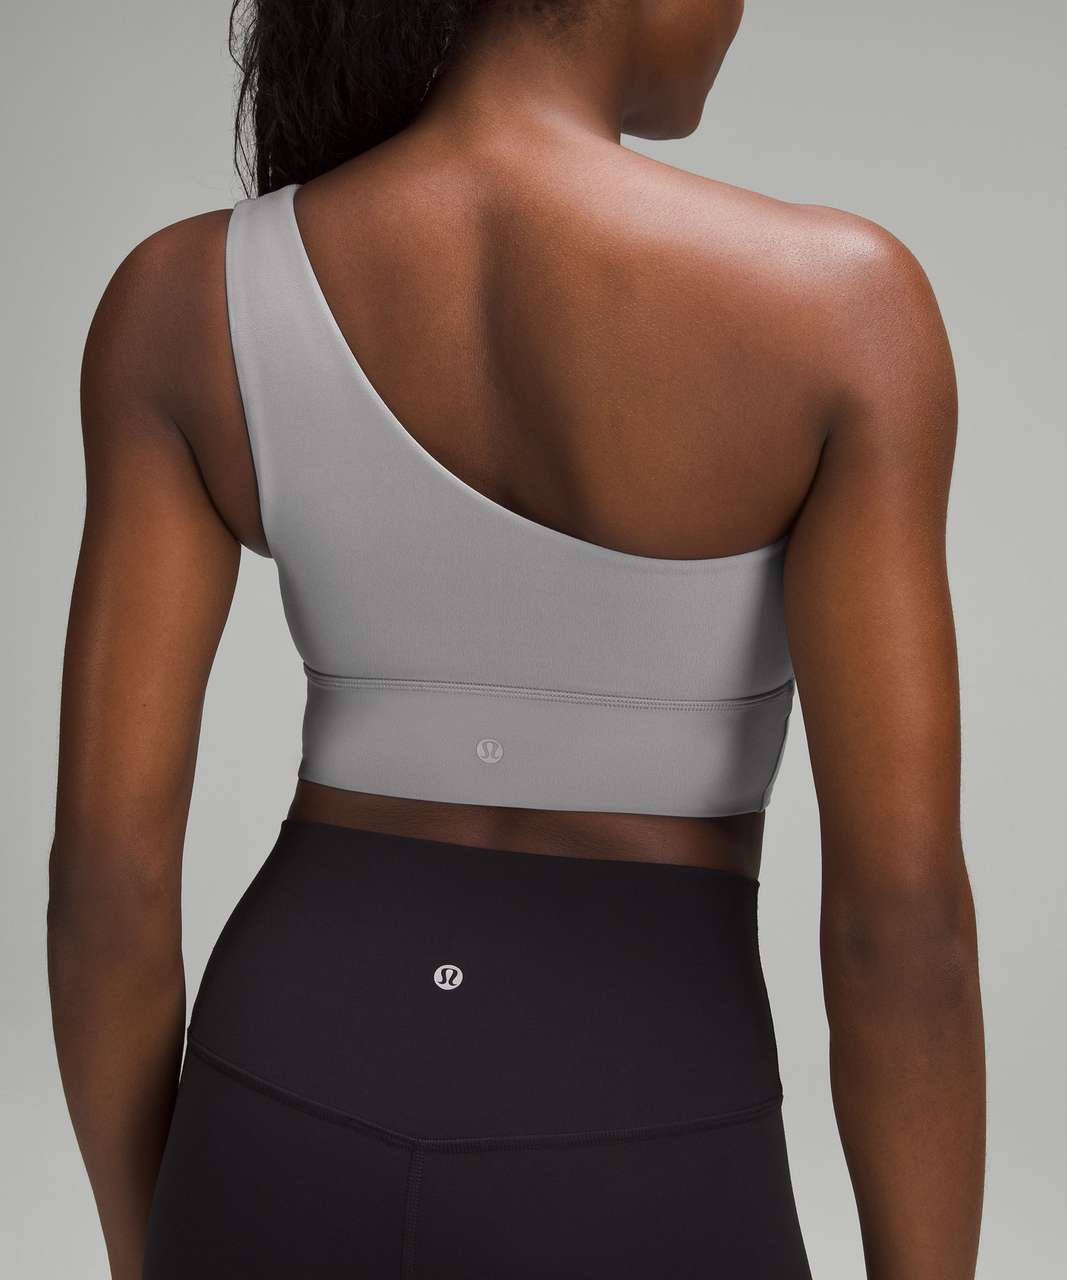 Lululemon Bone Align Asymmetrical Bra *Light Support, A/B Cup Size 6 - $58  New With Tags - From Lululemon